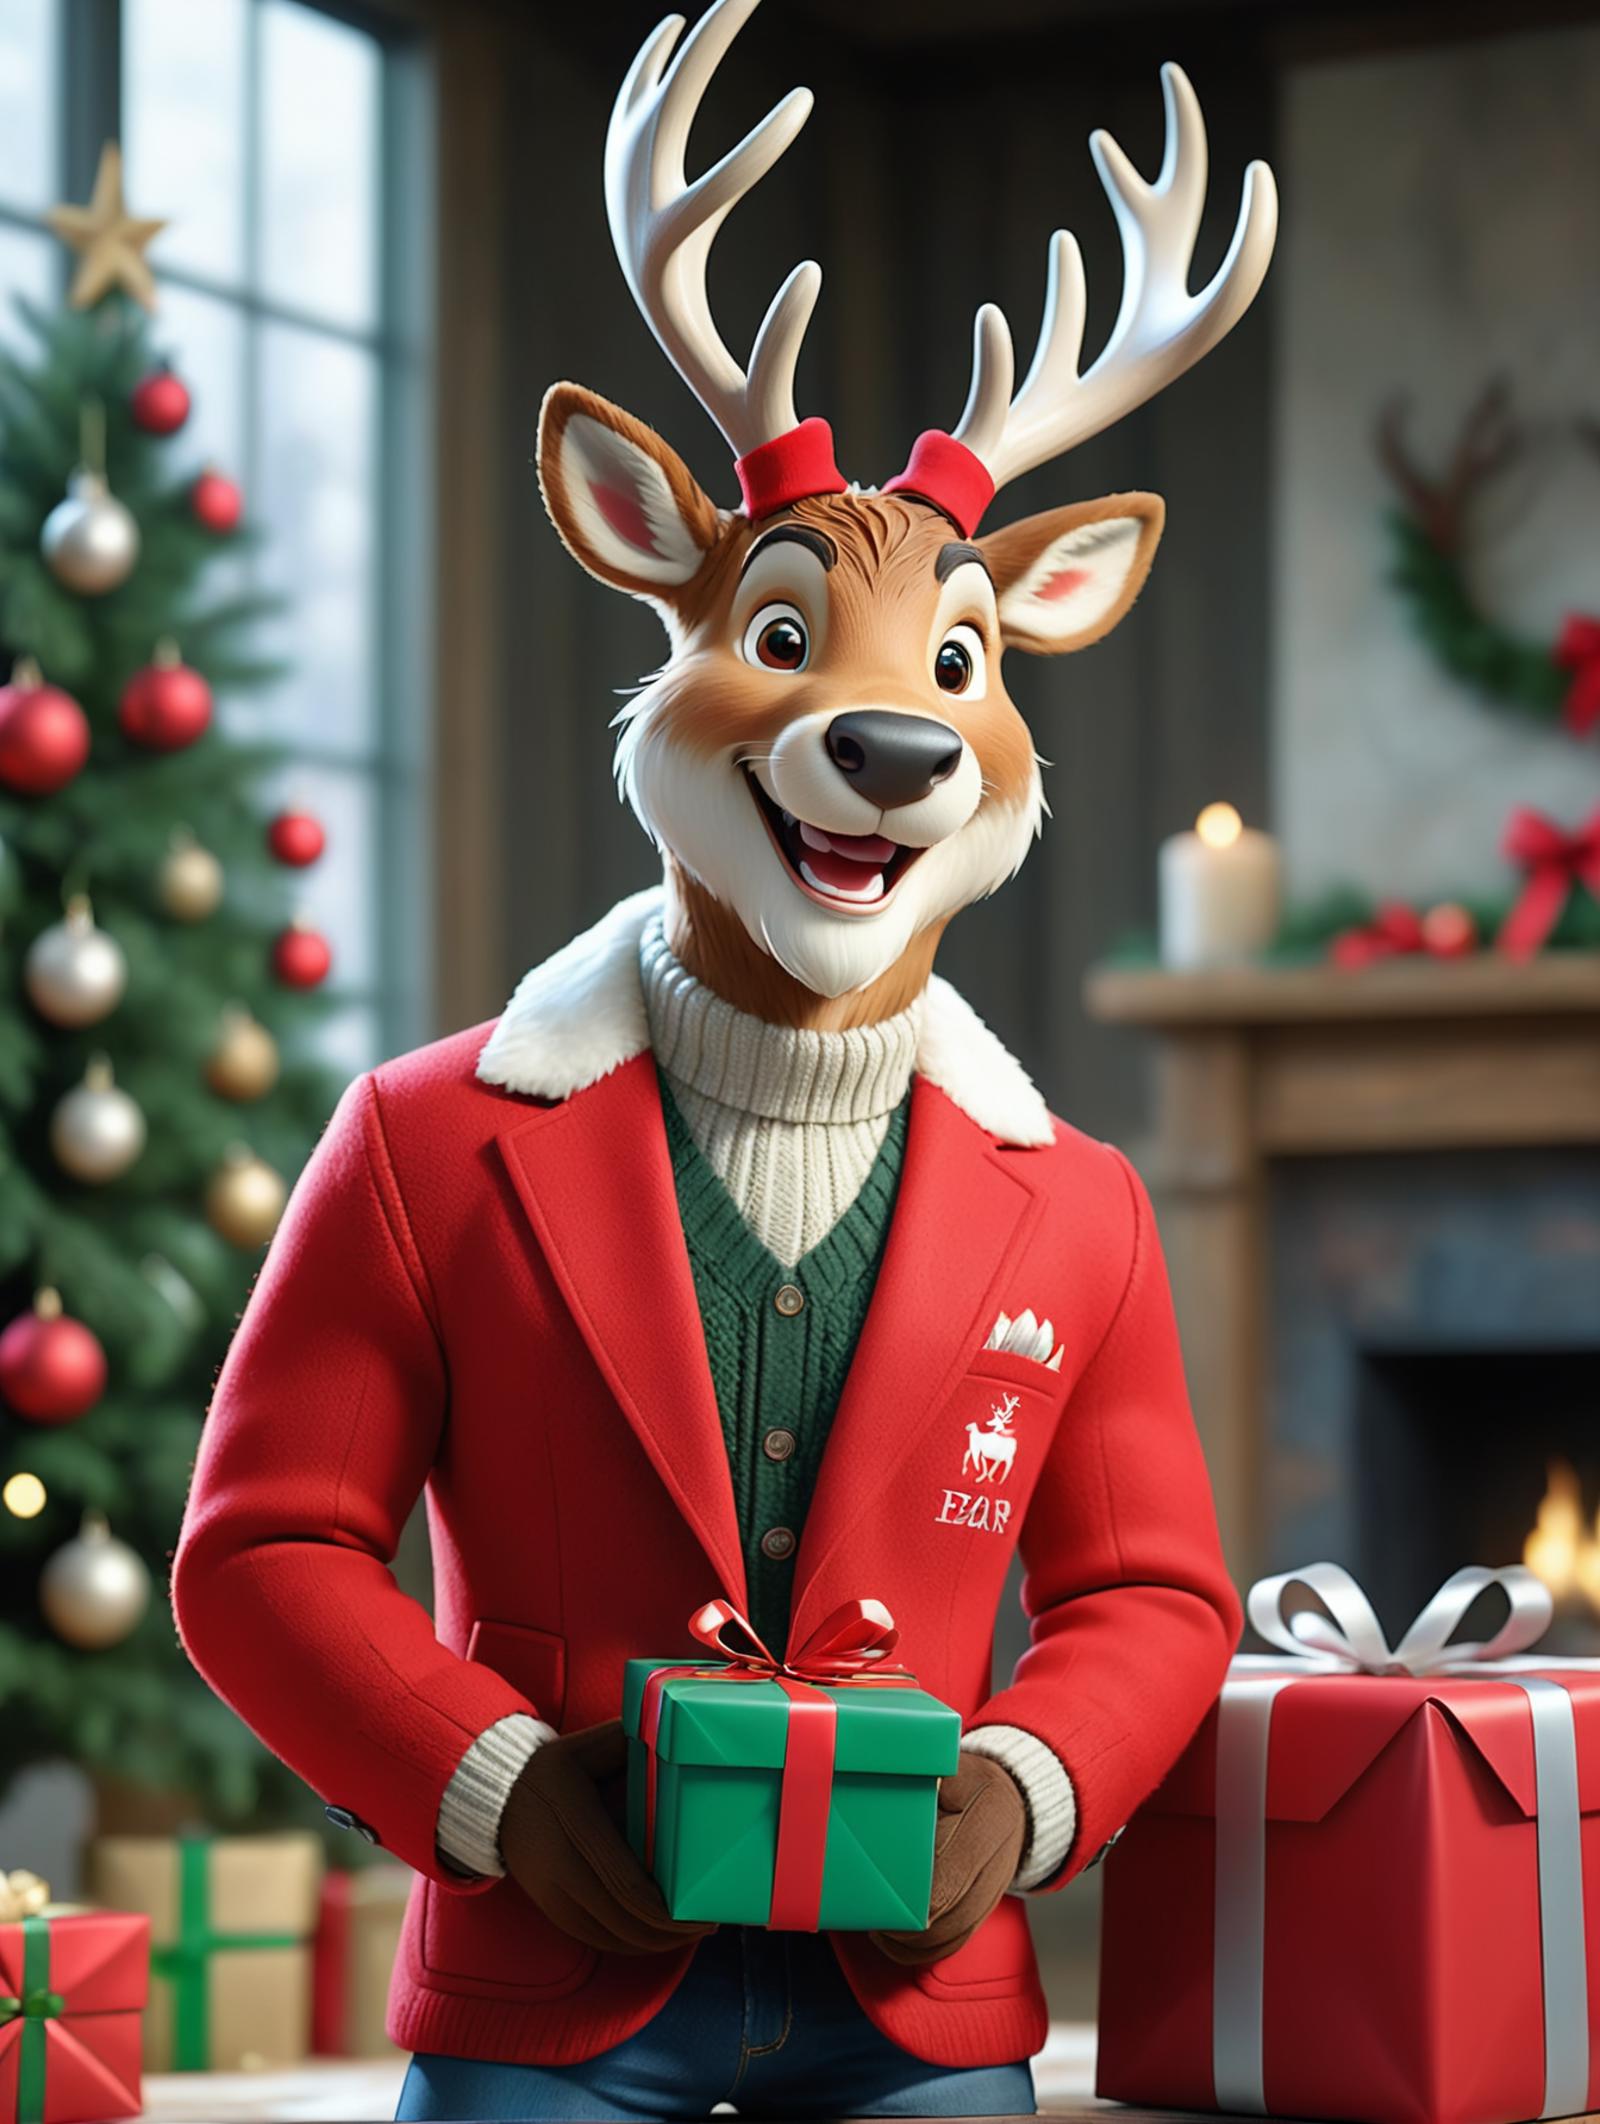 A deer wearing a red suit and green sweater holding a Christmas gift.